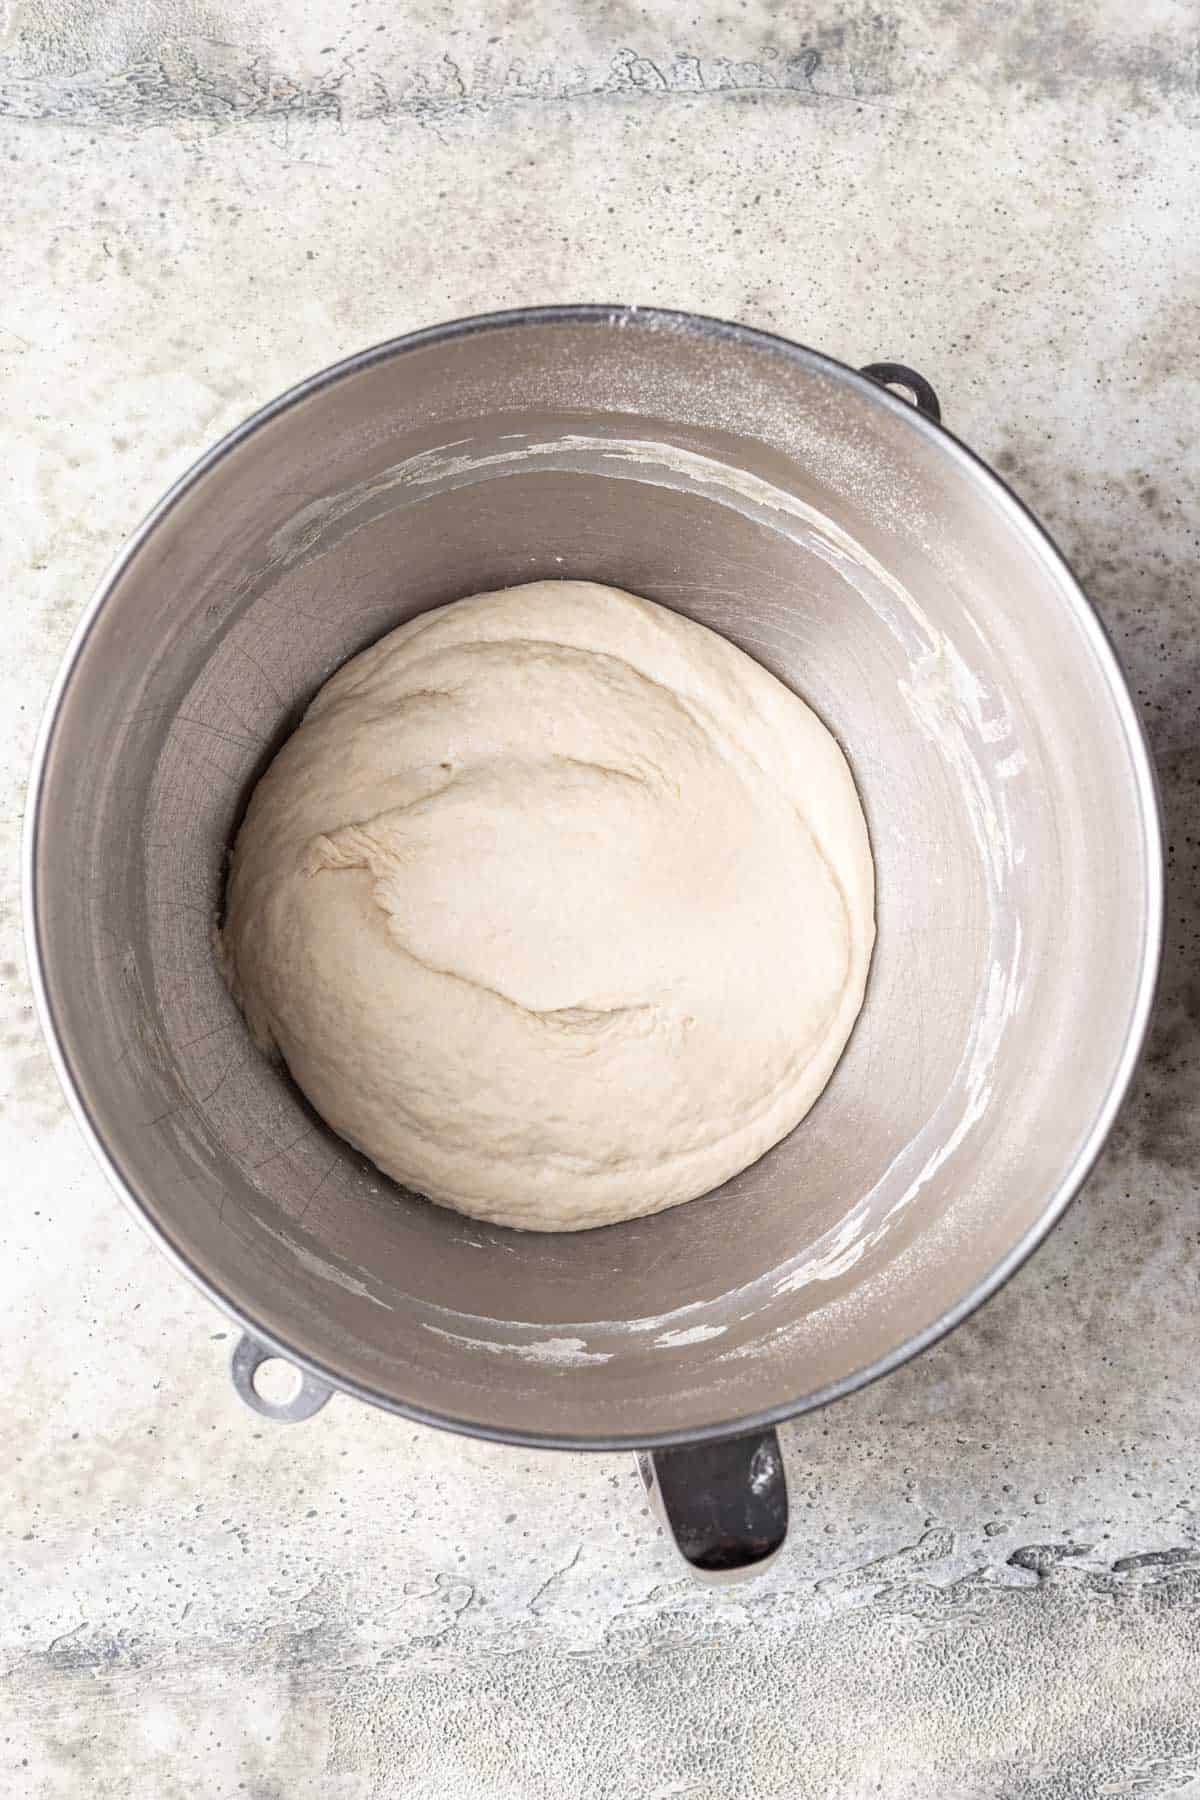 Beer pizza dough in a mixing bowl.